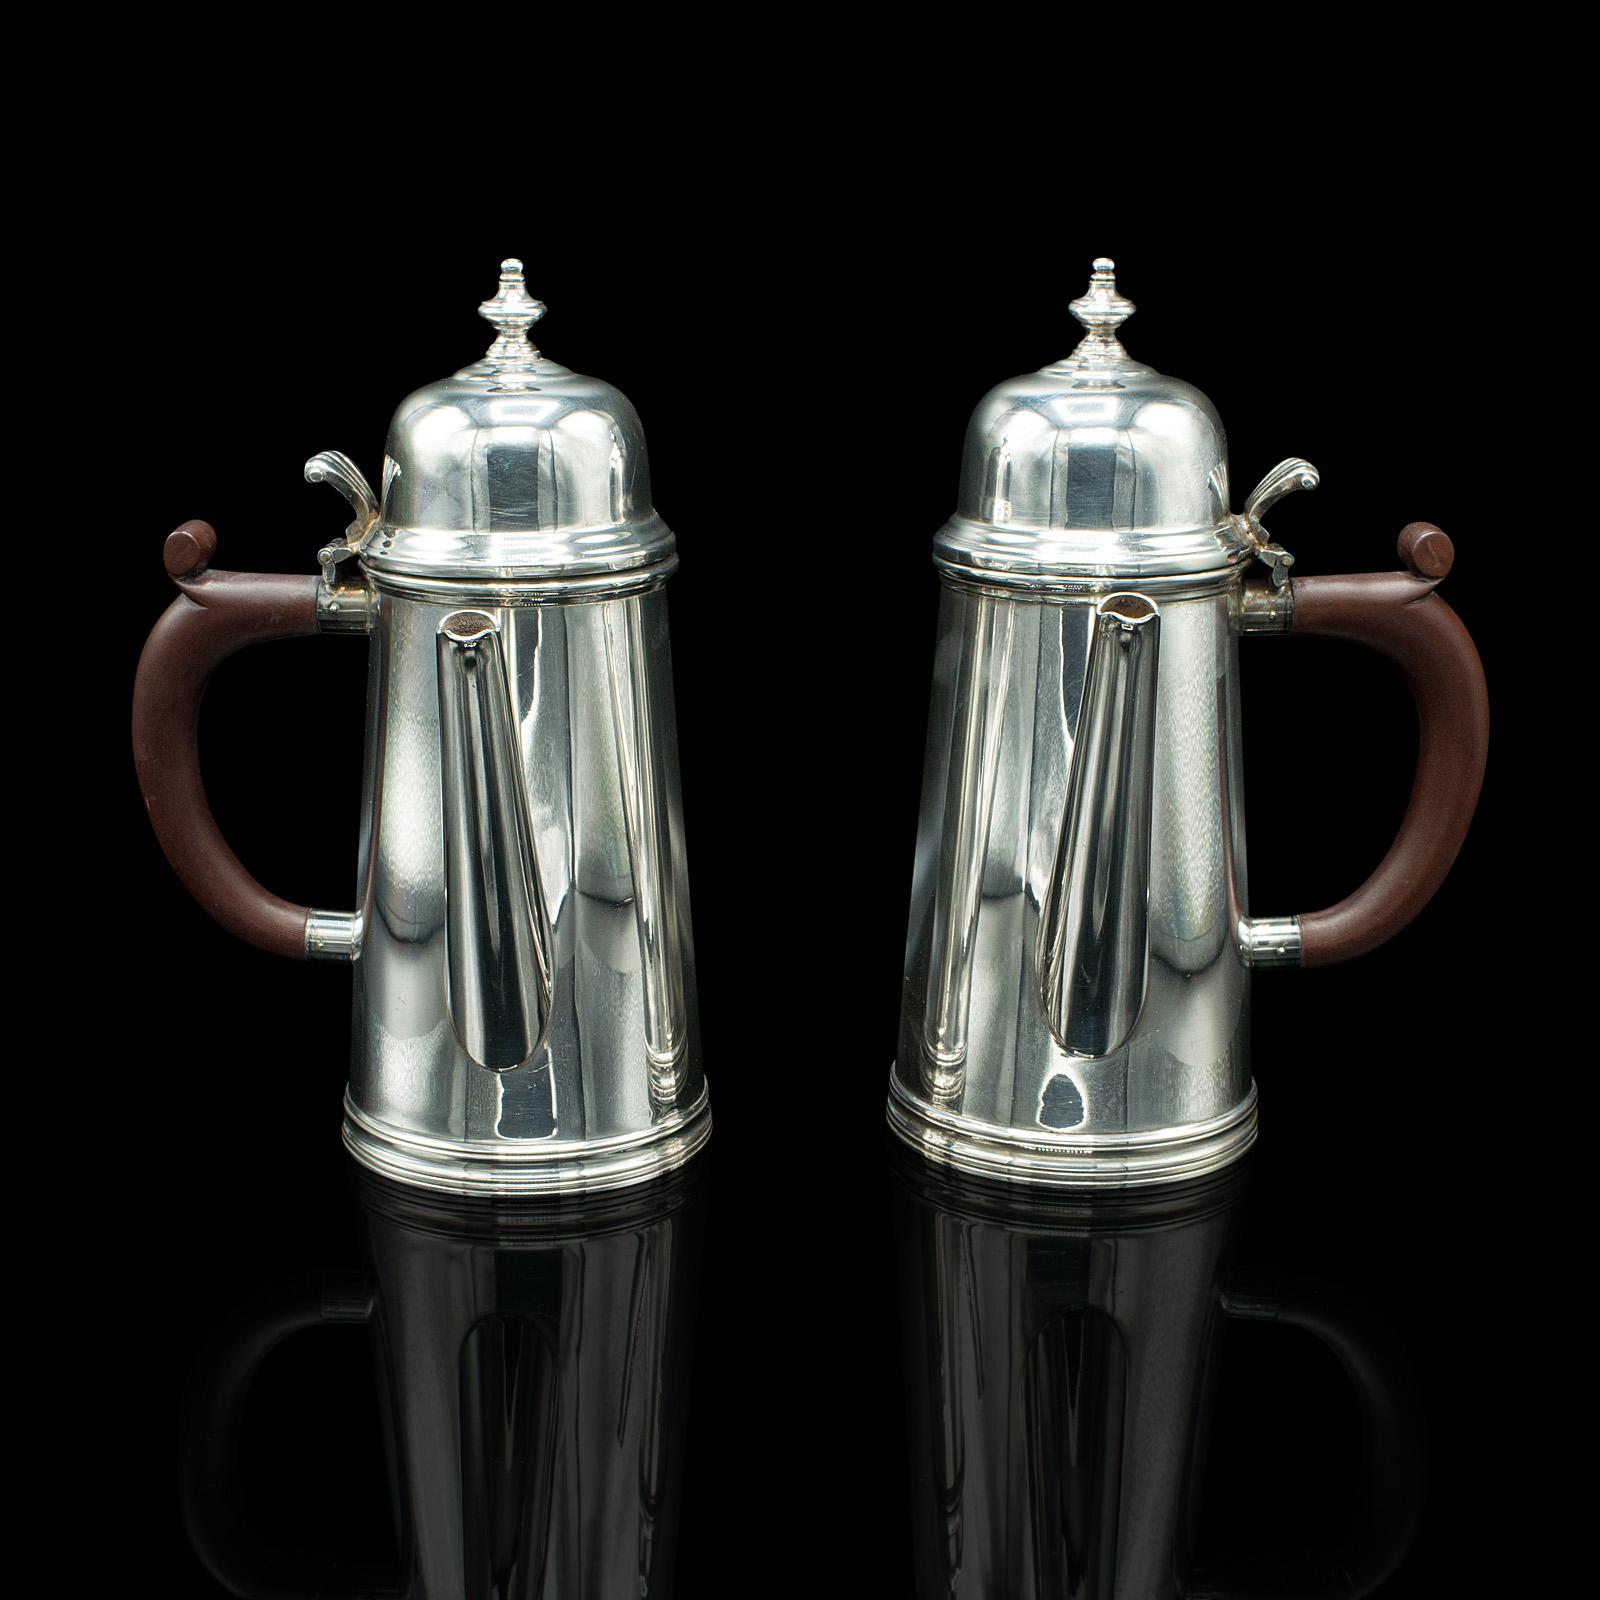 This is a pair of vintage hot chocolate jugs. An English, silver plated coffee serving pot, dating to the mid 20th century, circa 1940.

Fascinating serving jugs with a bright appearance and superb handles
Displays a desirable aged patina and in